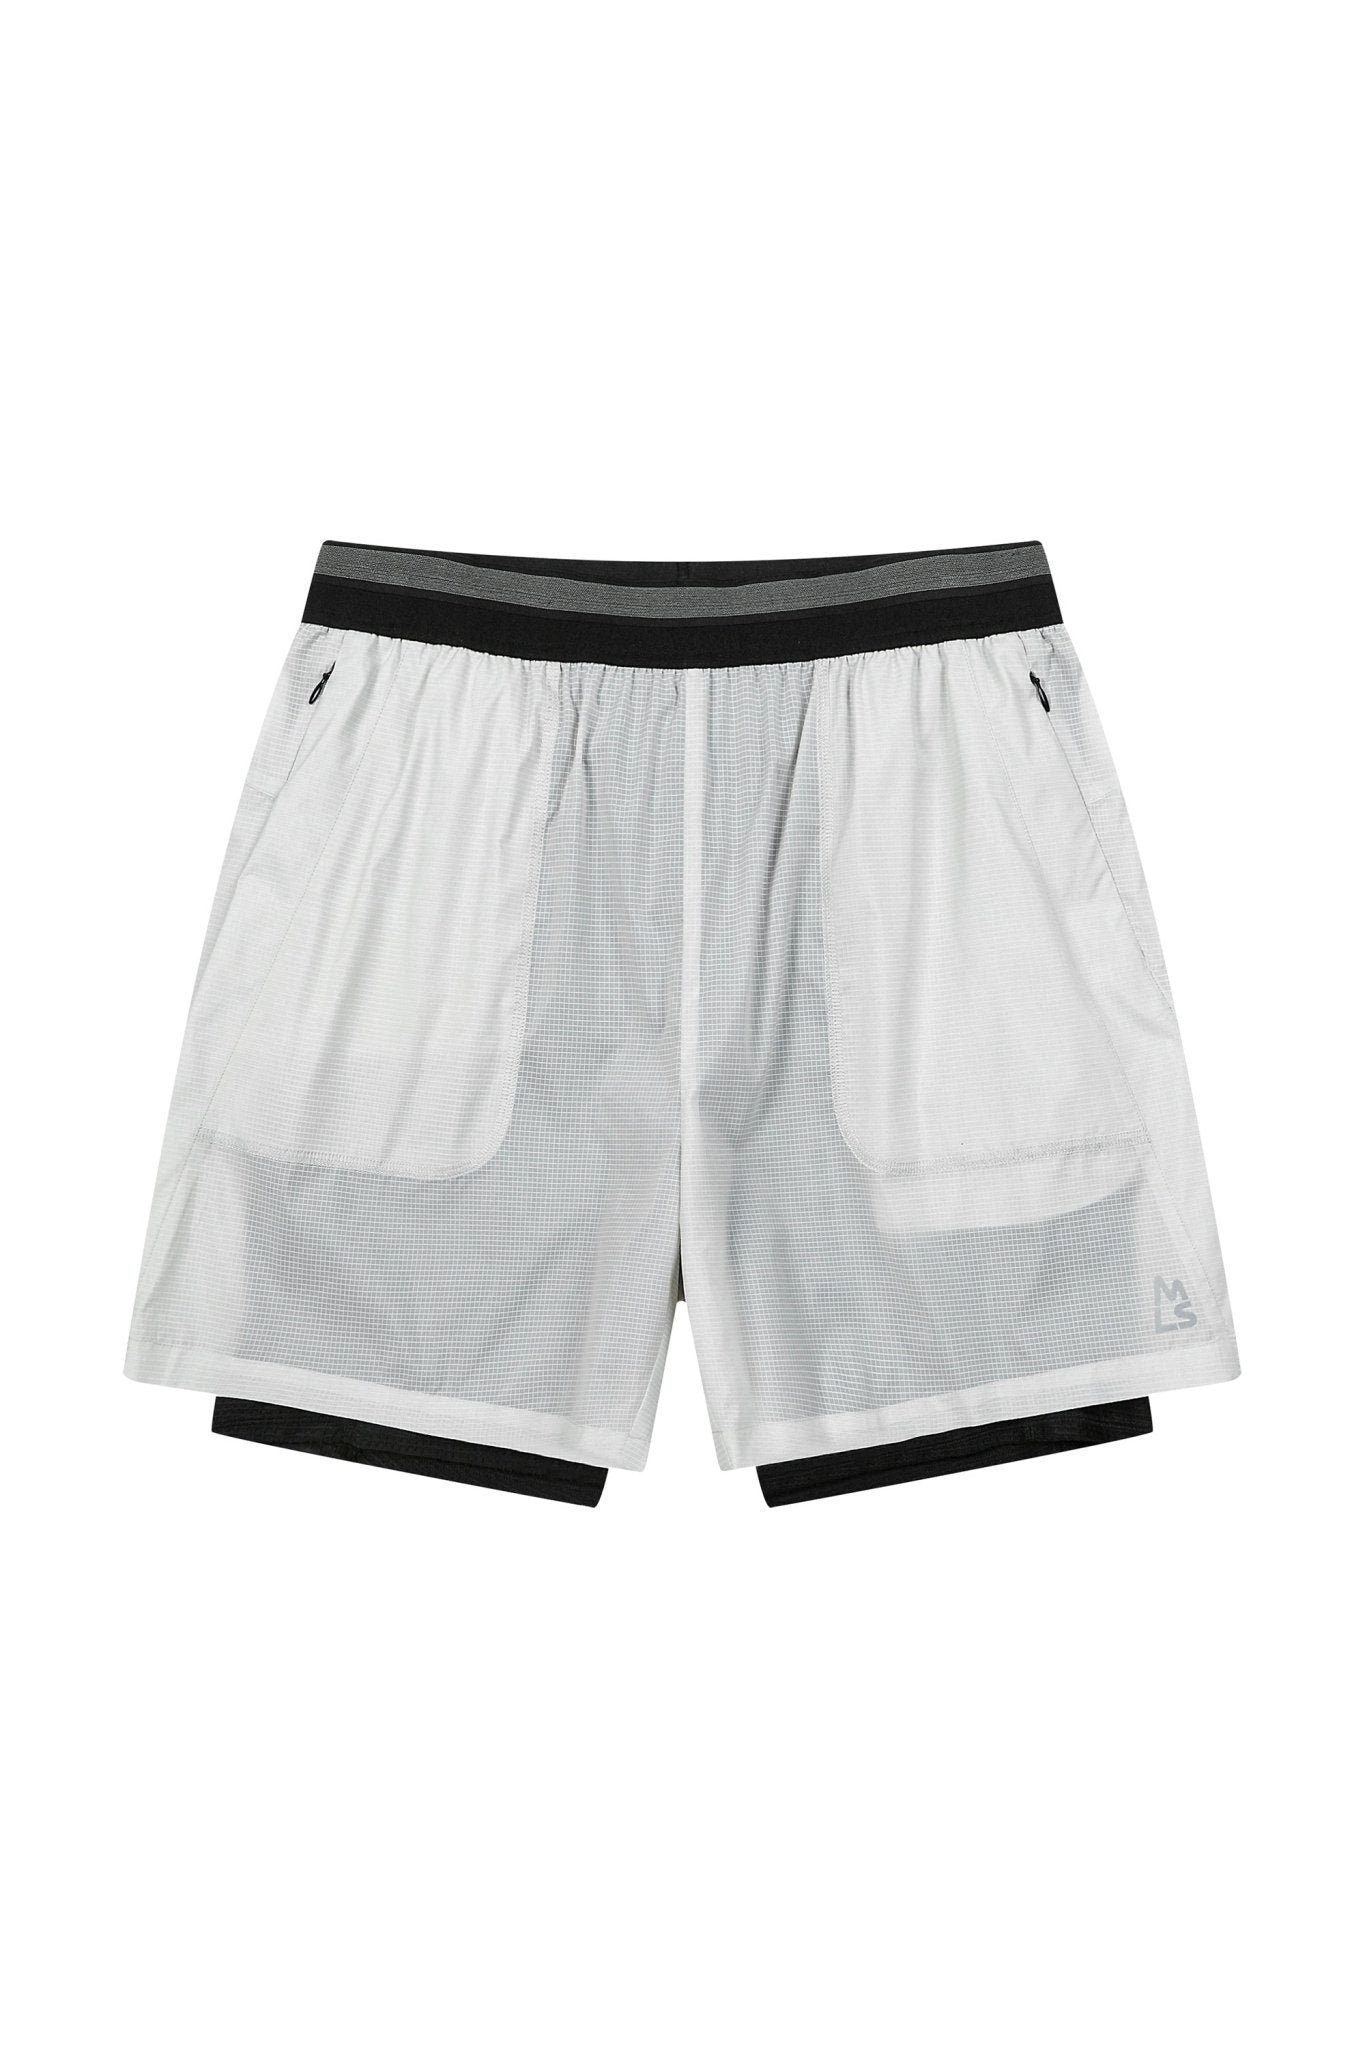 Solace Shorts - Magnlens